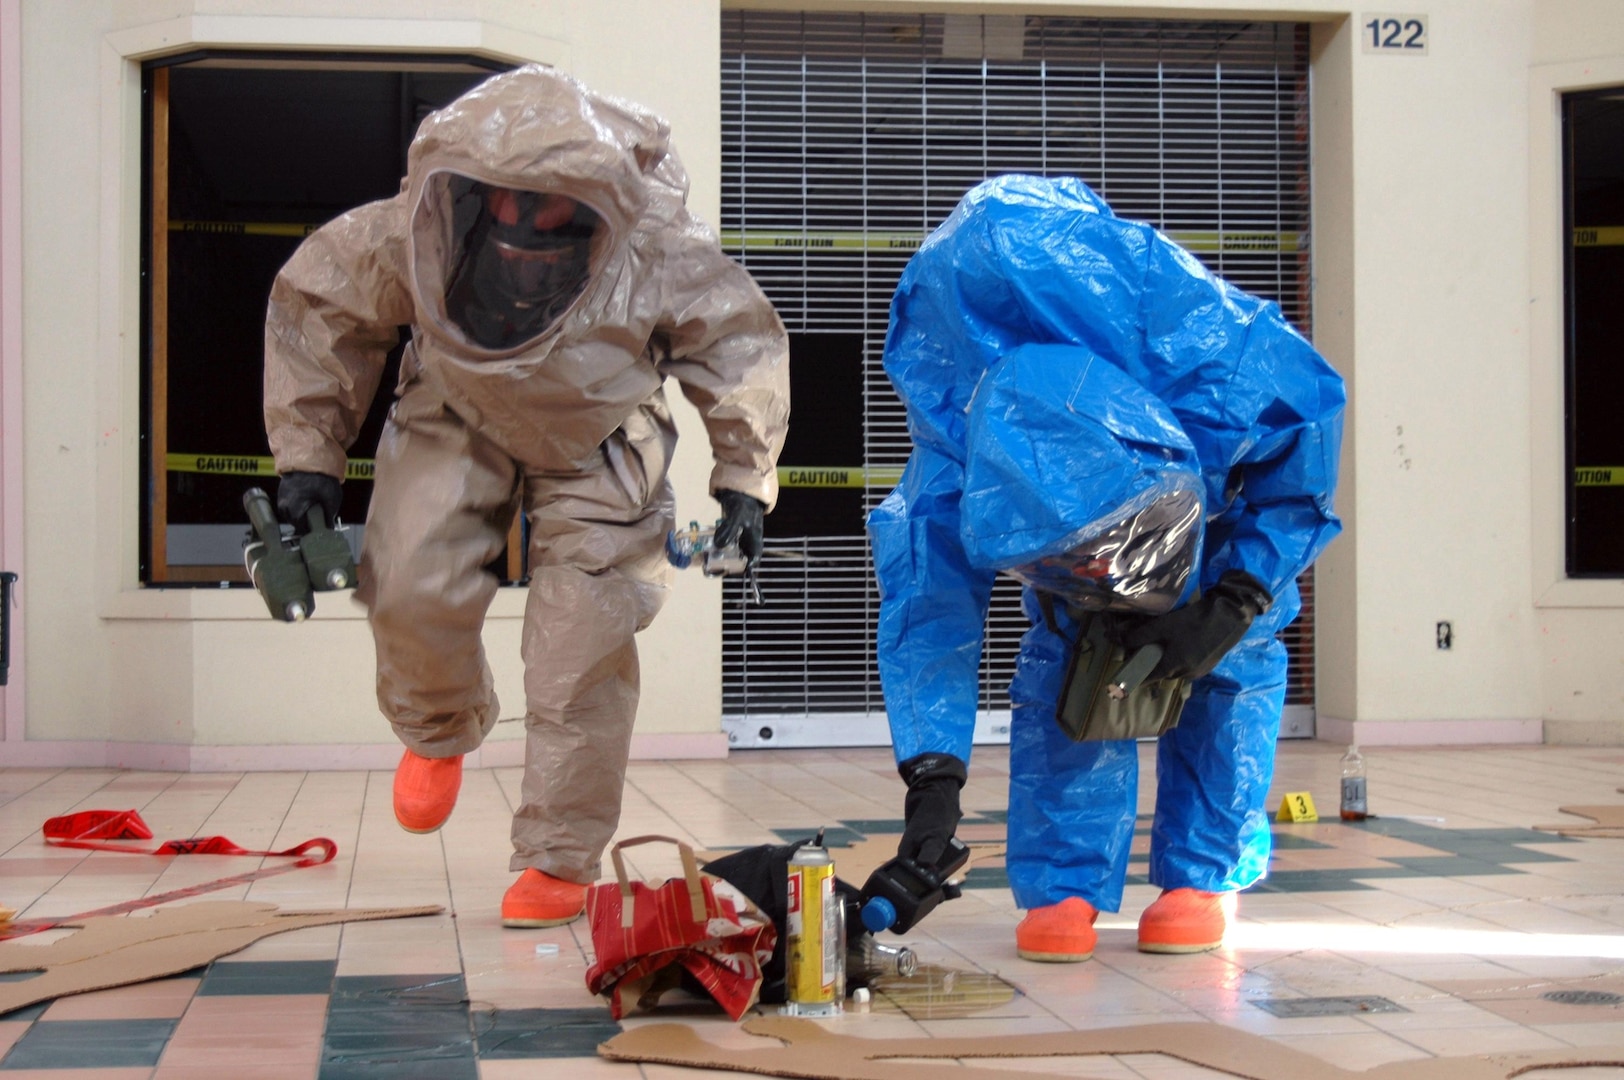 Two members of the 92nd Civil Support Team take a sample of a simulated hazardous substance in a Sparks, Nev., shopping mall during training on Nov. 25, 2005. The Nevada National Guard's civil support team was called to assist Las Vegas Metro Police on Feb. 28, 2008, with a suspicious substance that was later identified as deadly ricin. The team is one of 52 certified units nationwide to support local and state authorities at domestic incident sites by identifying hazardous agents and substances.